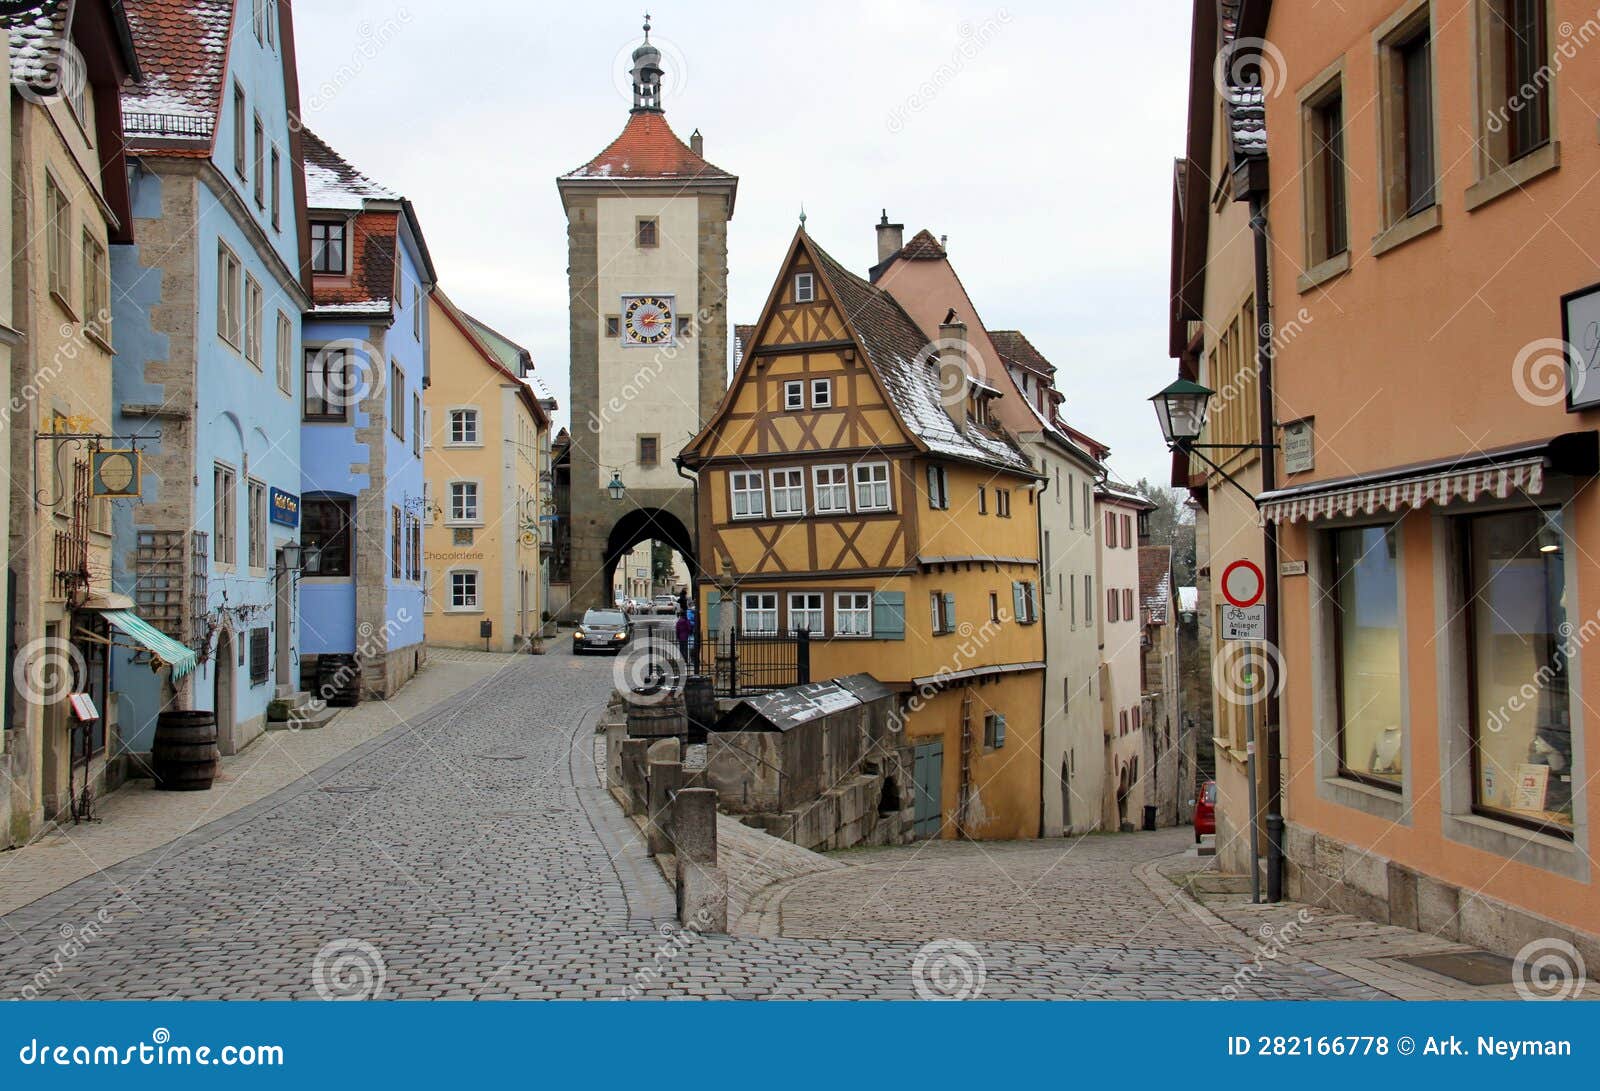 landmark spot in the old town, view on snowless winter afternoon, rothenburg ob der tauber, germany